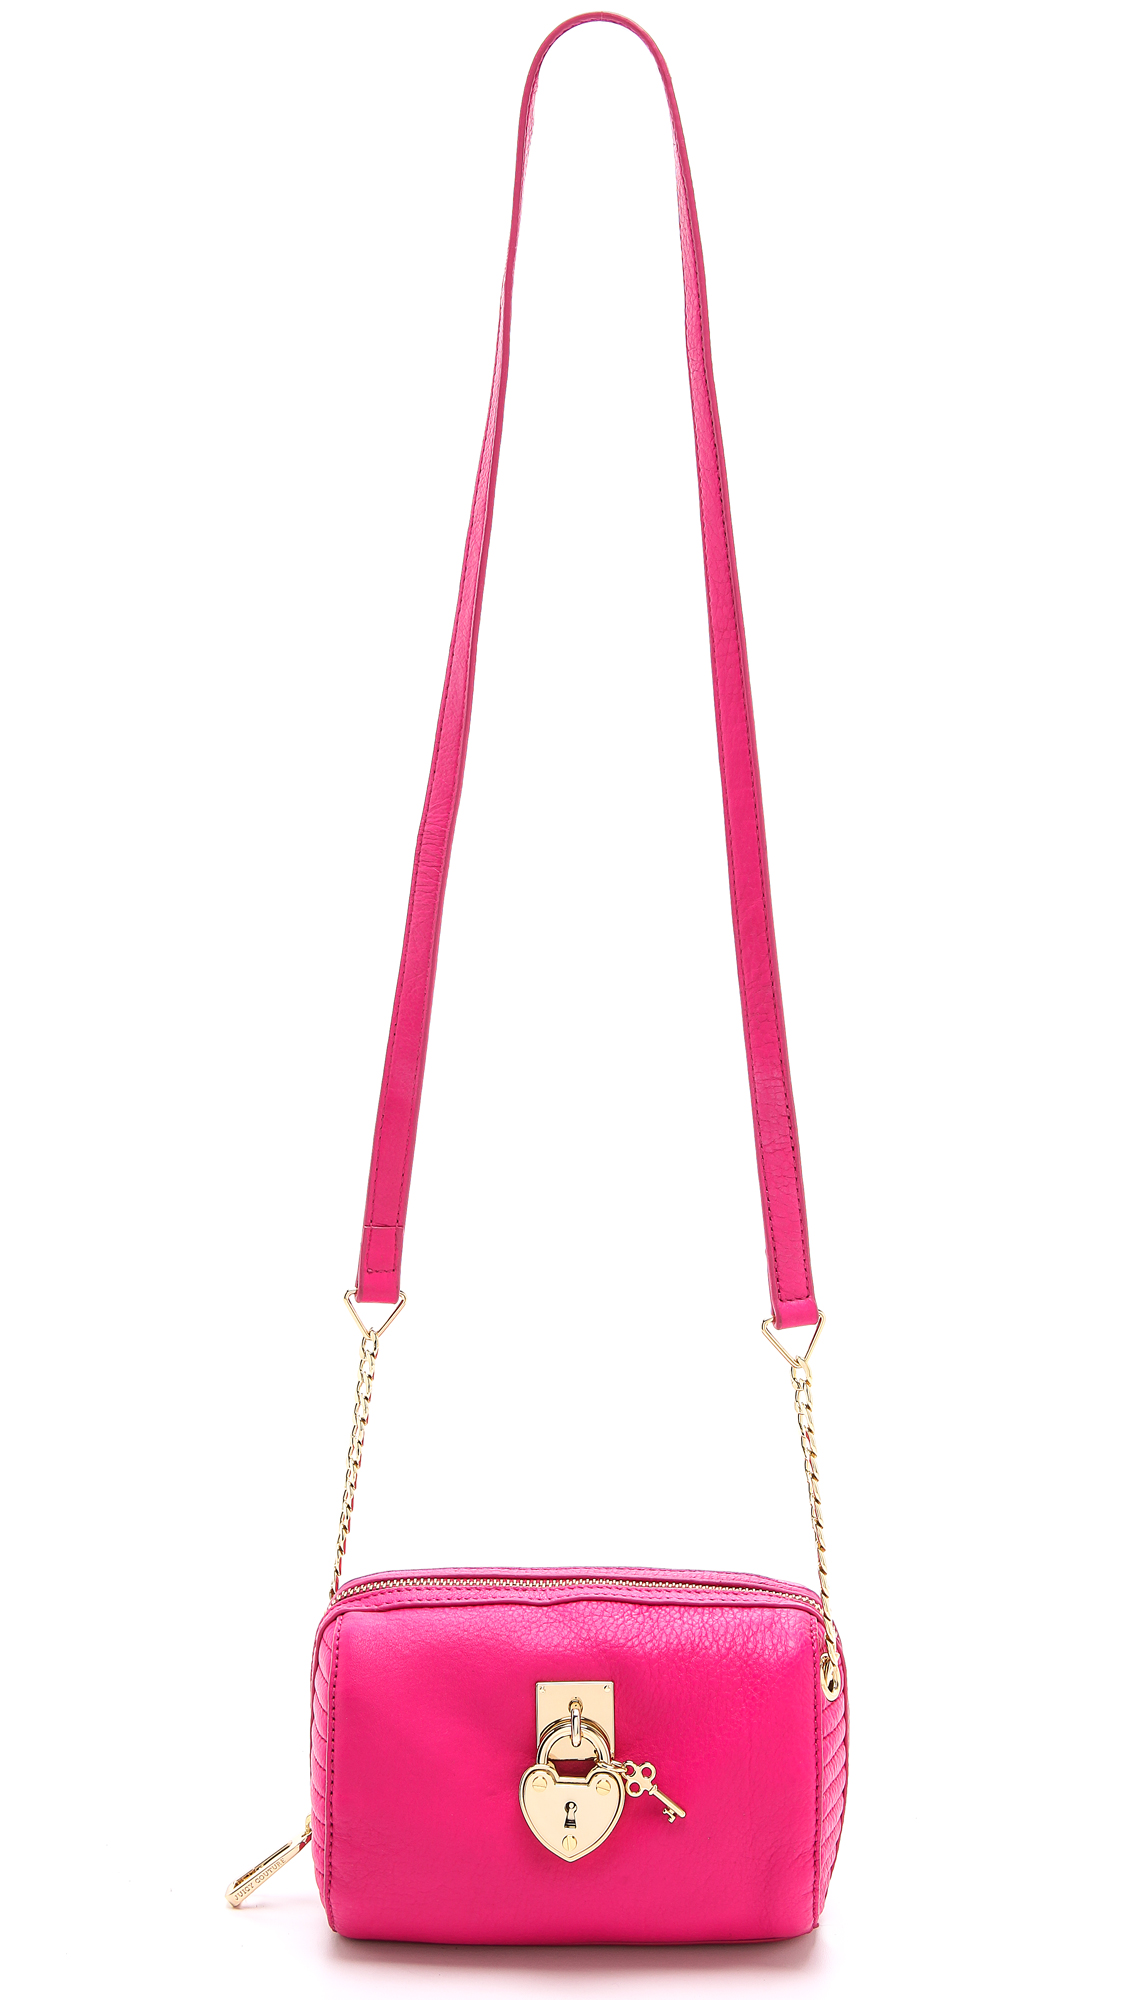 Lyst - Juicy couture Mini Steffy Bag in Pink